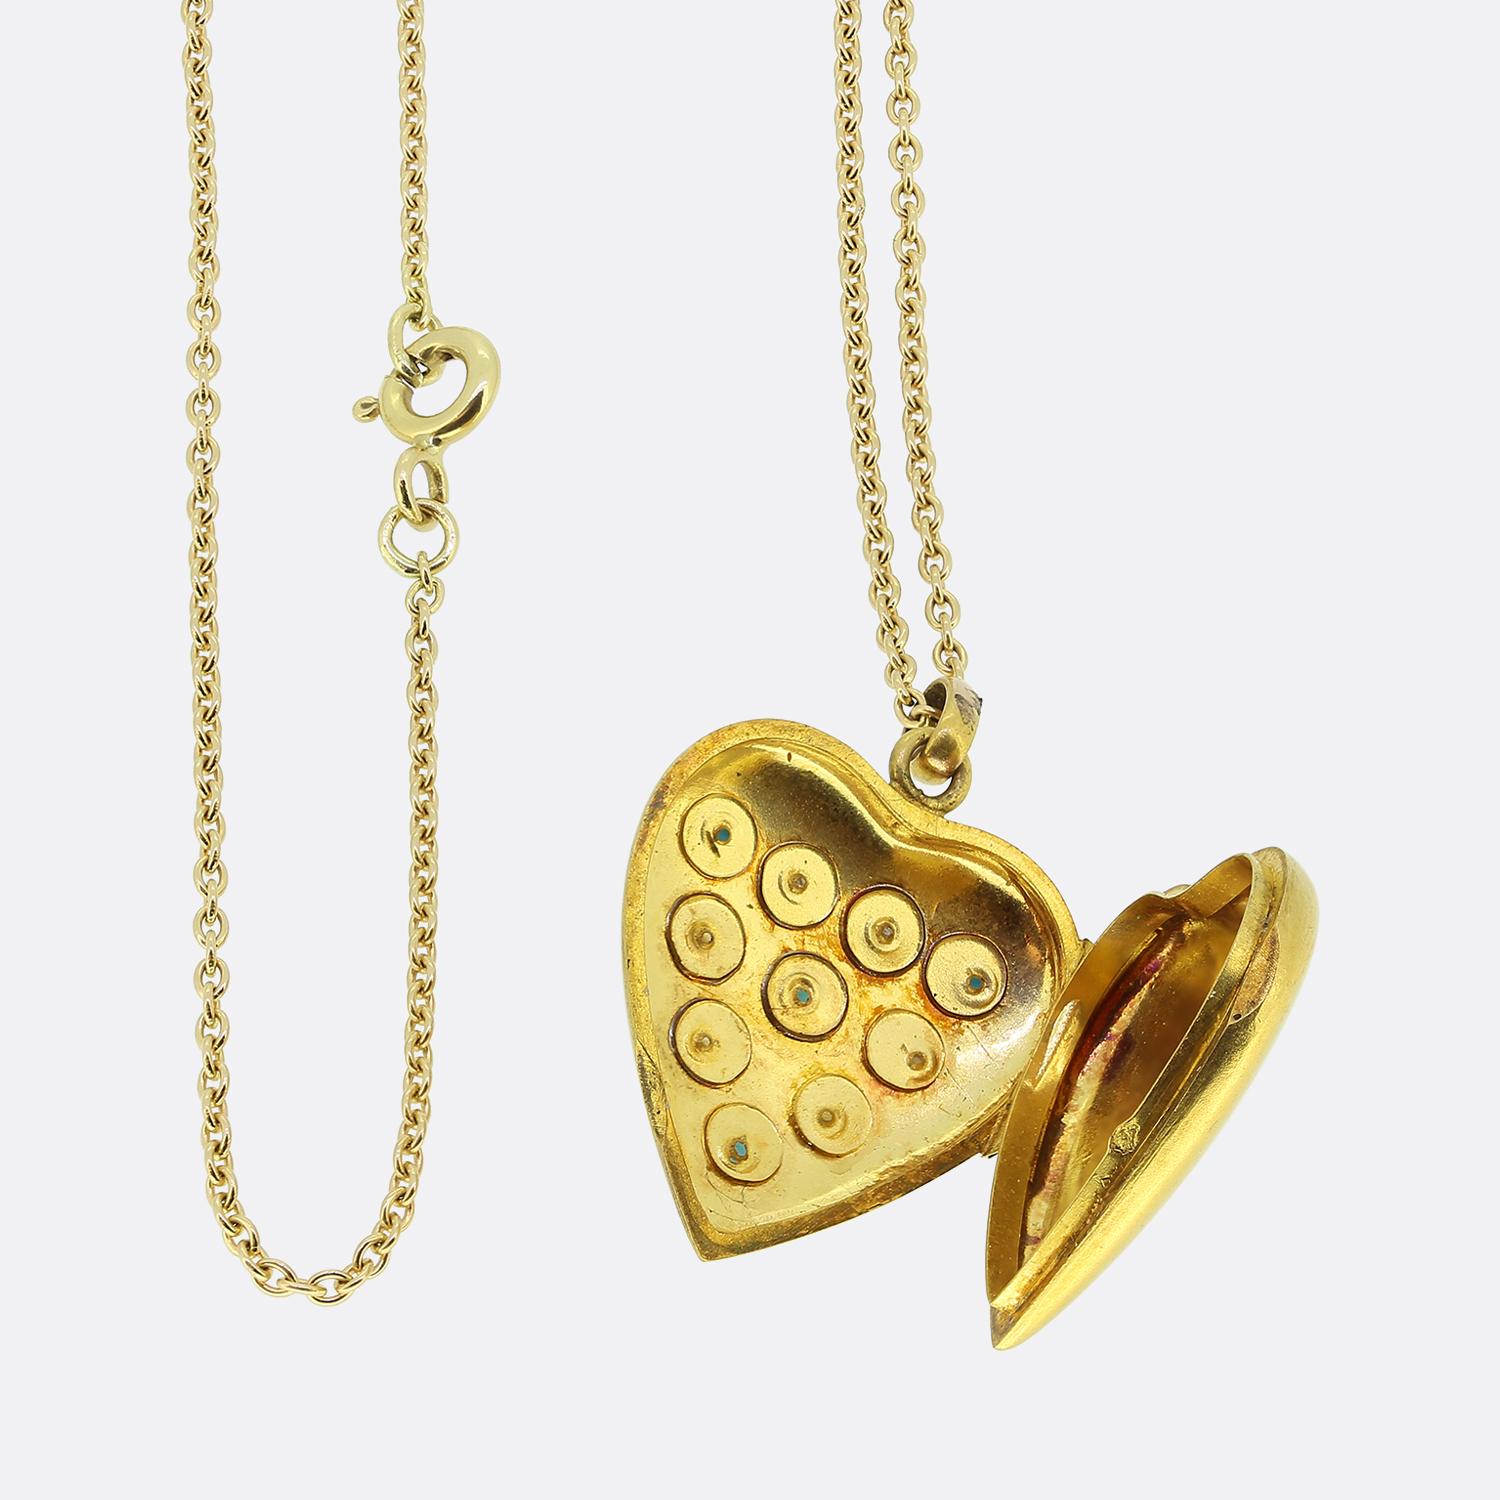 Here we have a charming locket necklace. This antique locket has been crafted from a rich 20ct yellow gold into the shape of a love heart. The body has then been set with wonderful array of individually star-burst set round turquoise and seed